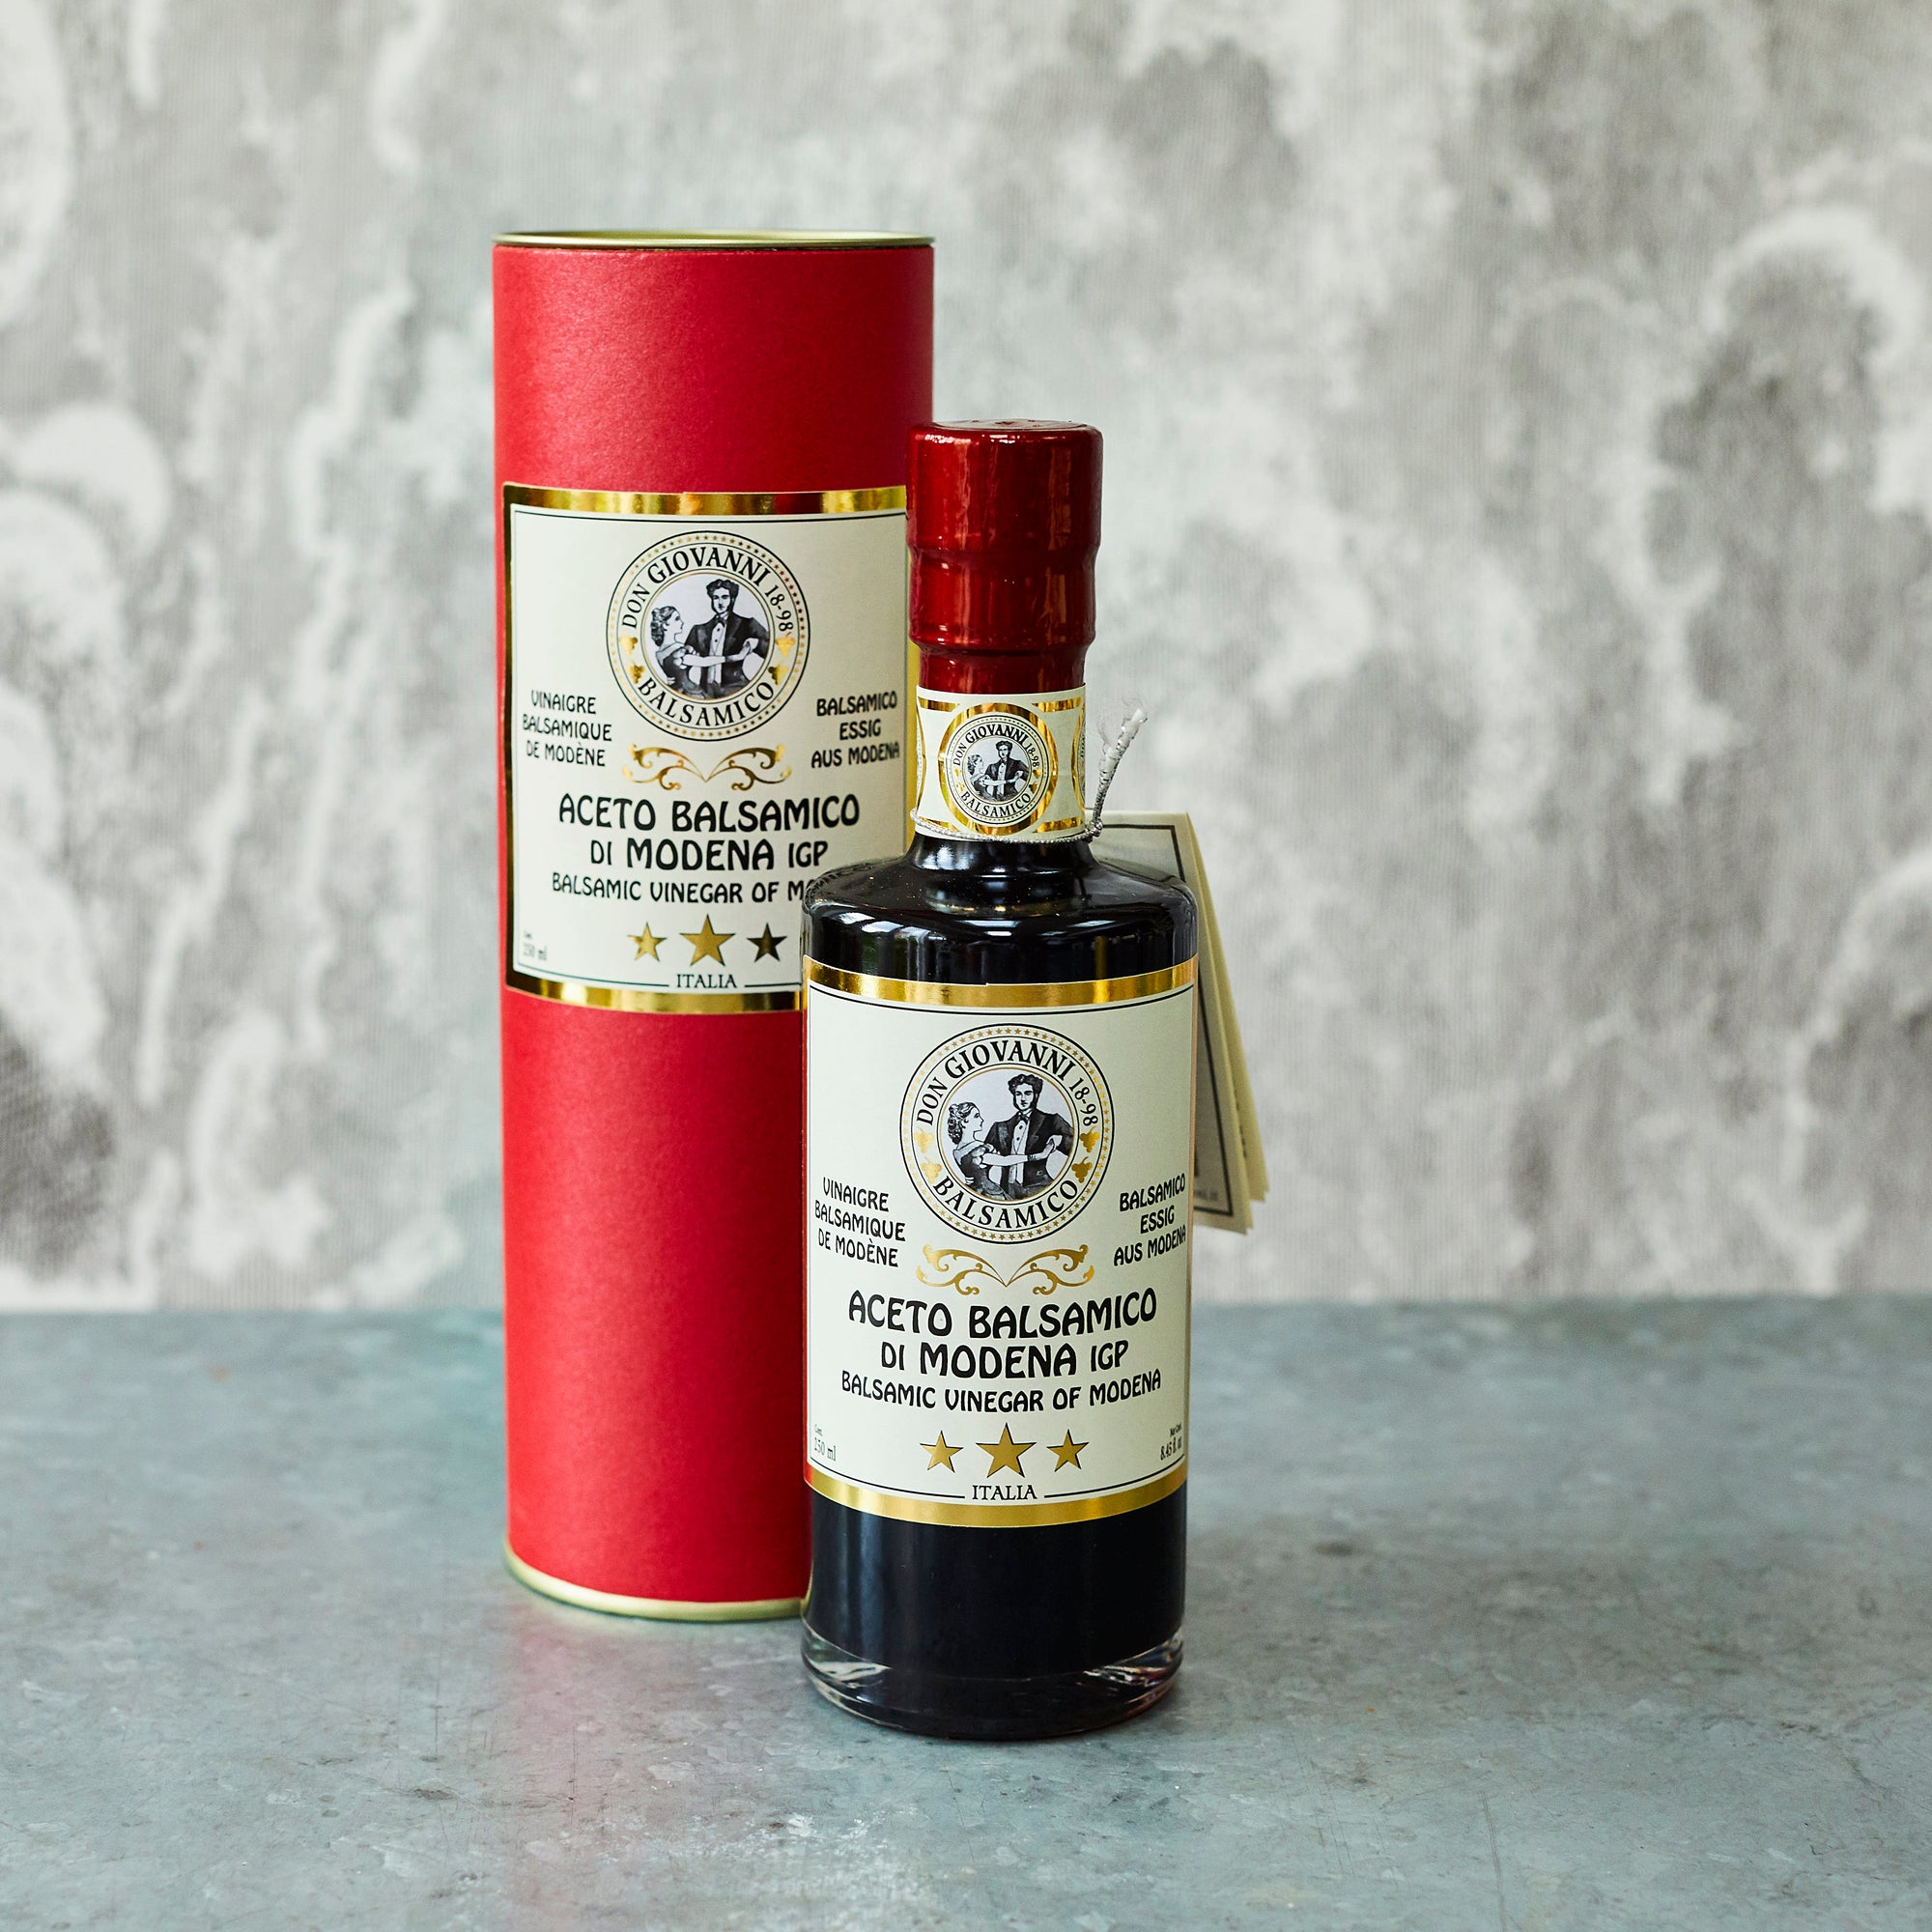 Don Giovanni Aceto Balsamico IGP (6 years) - Vinegar Shed